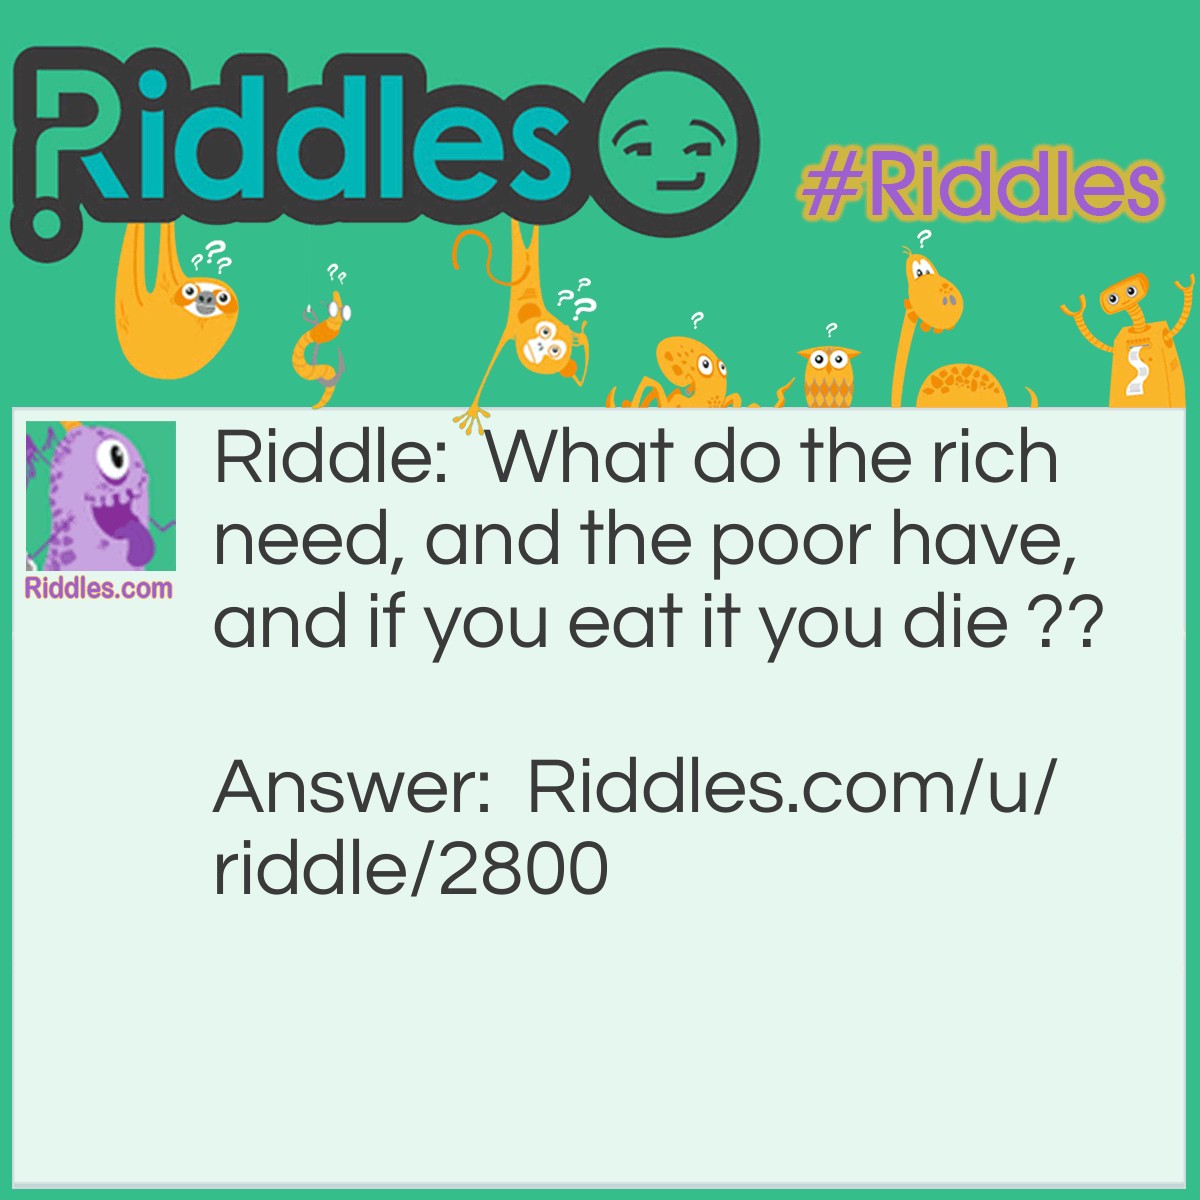 Riddle: What do the rich need, and the poor have, and if you eat it you die ?? Answer: Nothing.